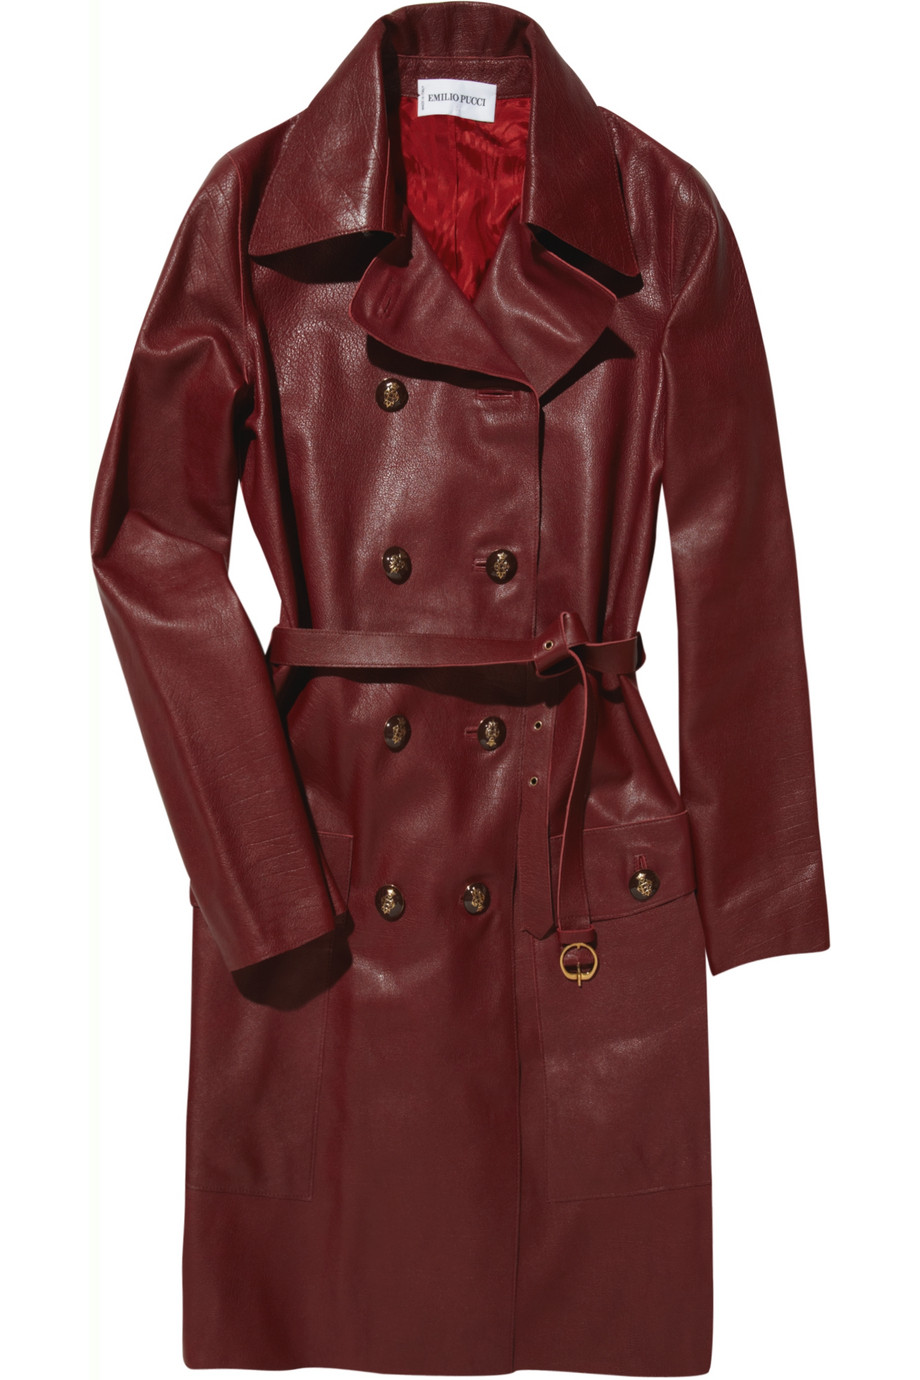 Lyst - Emilio Pucci Textured-leather Trench Coat in Red